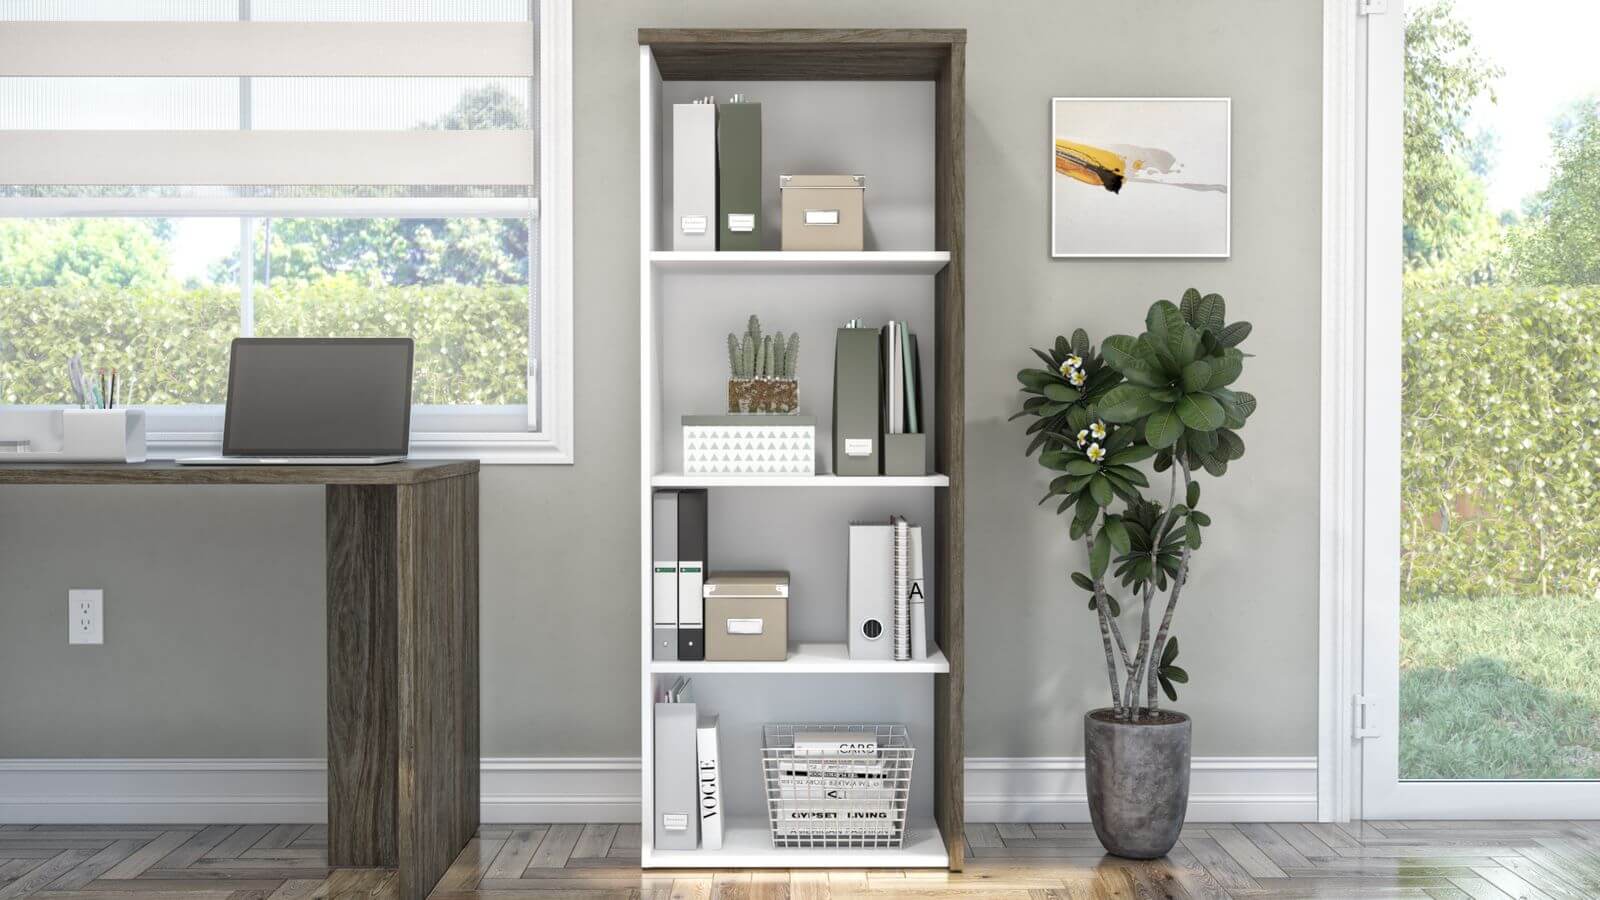 Home office bookcase